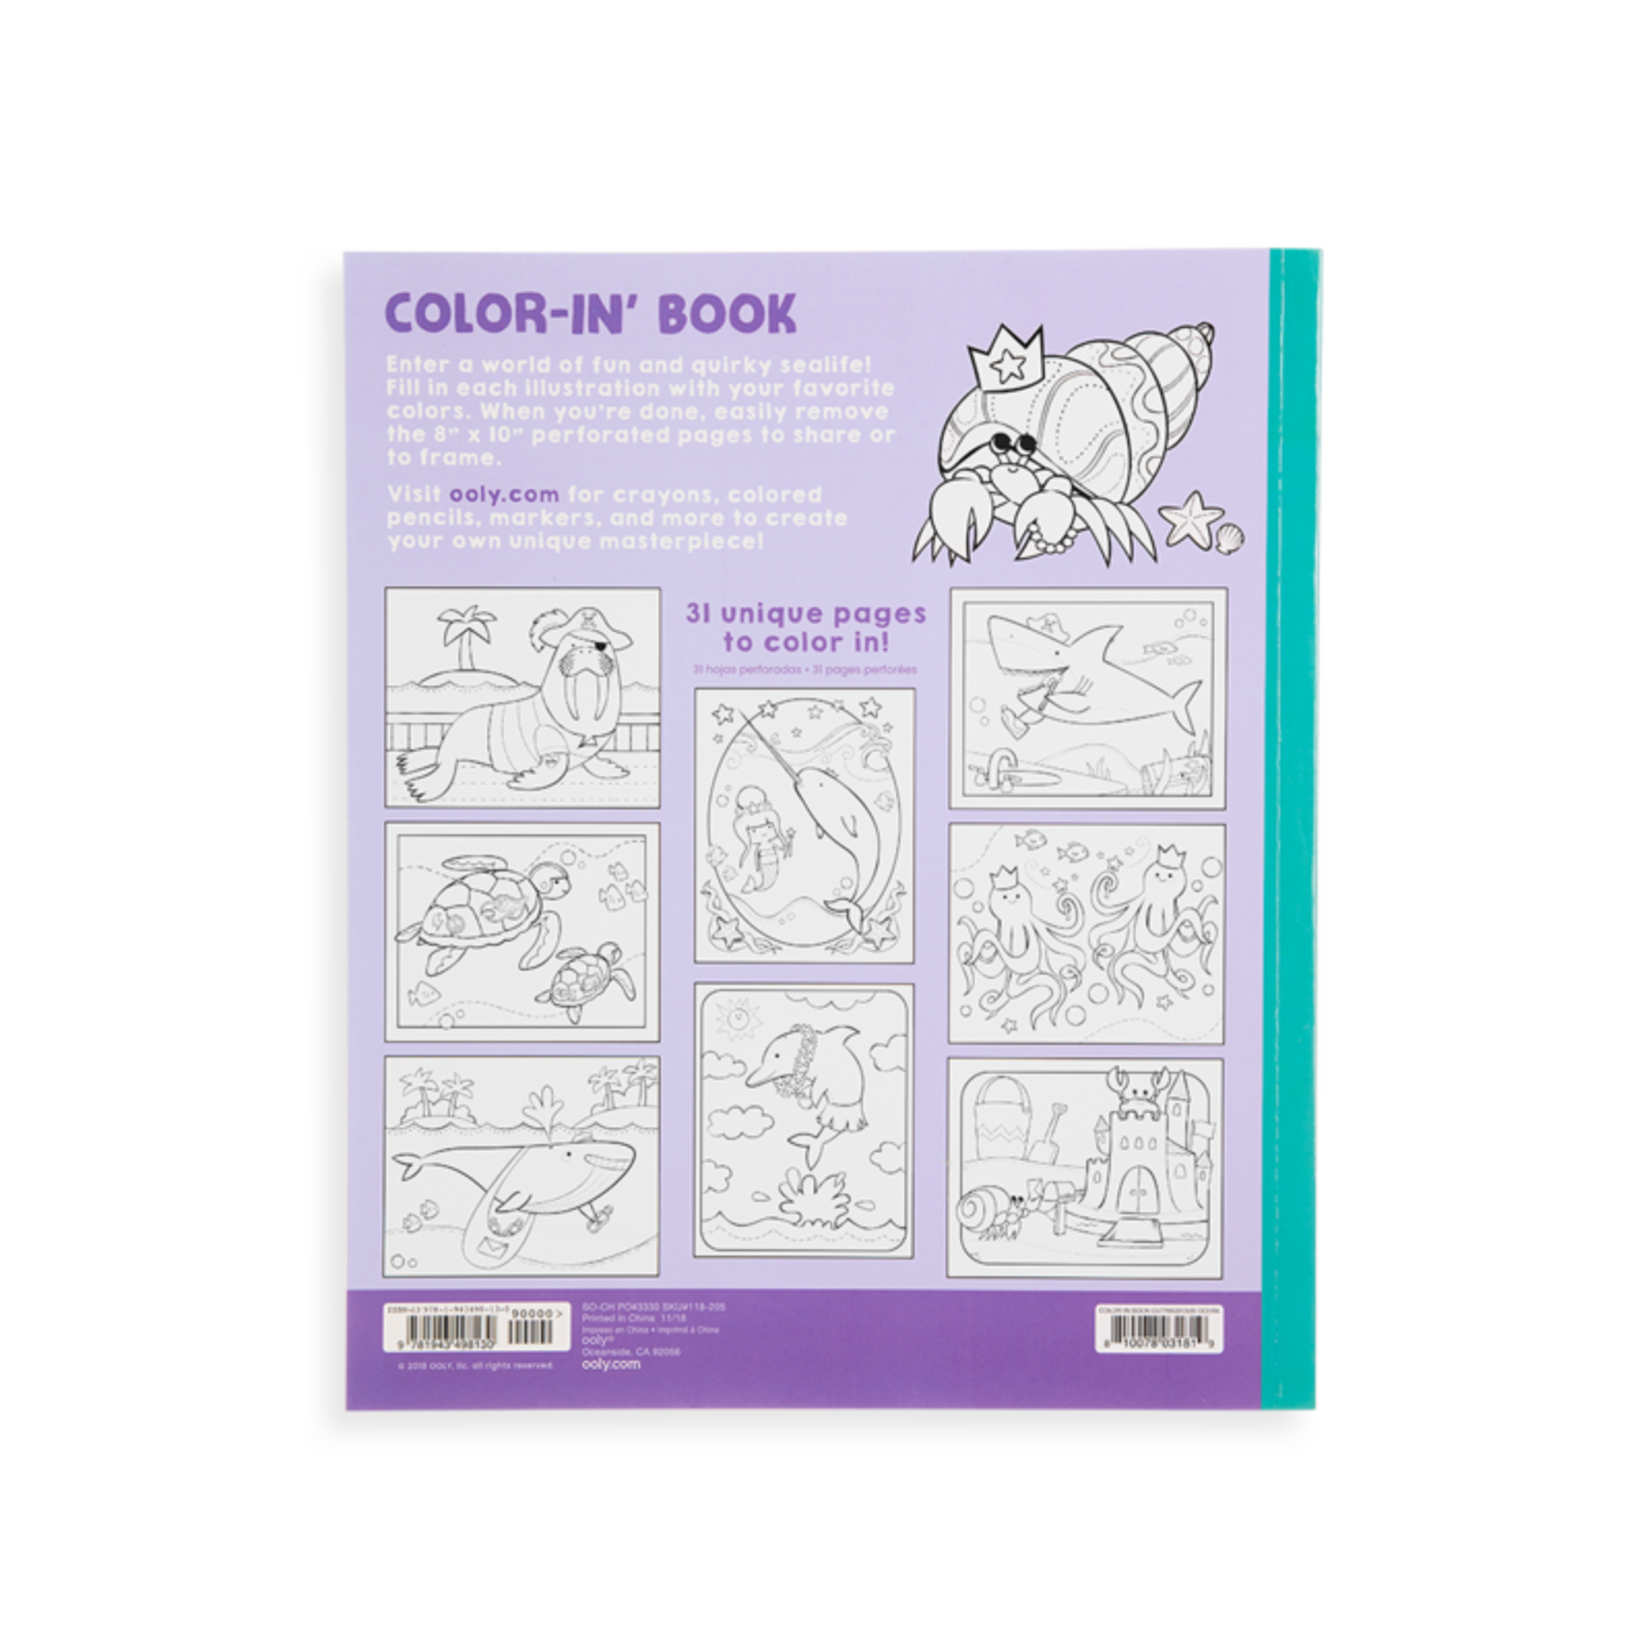 Ooly Outrageous Ocean Coloring Book